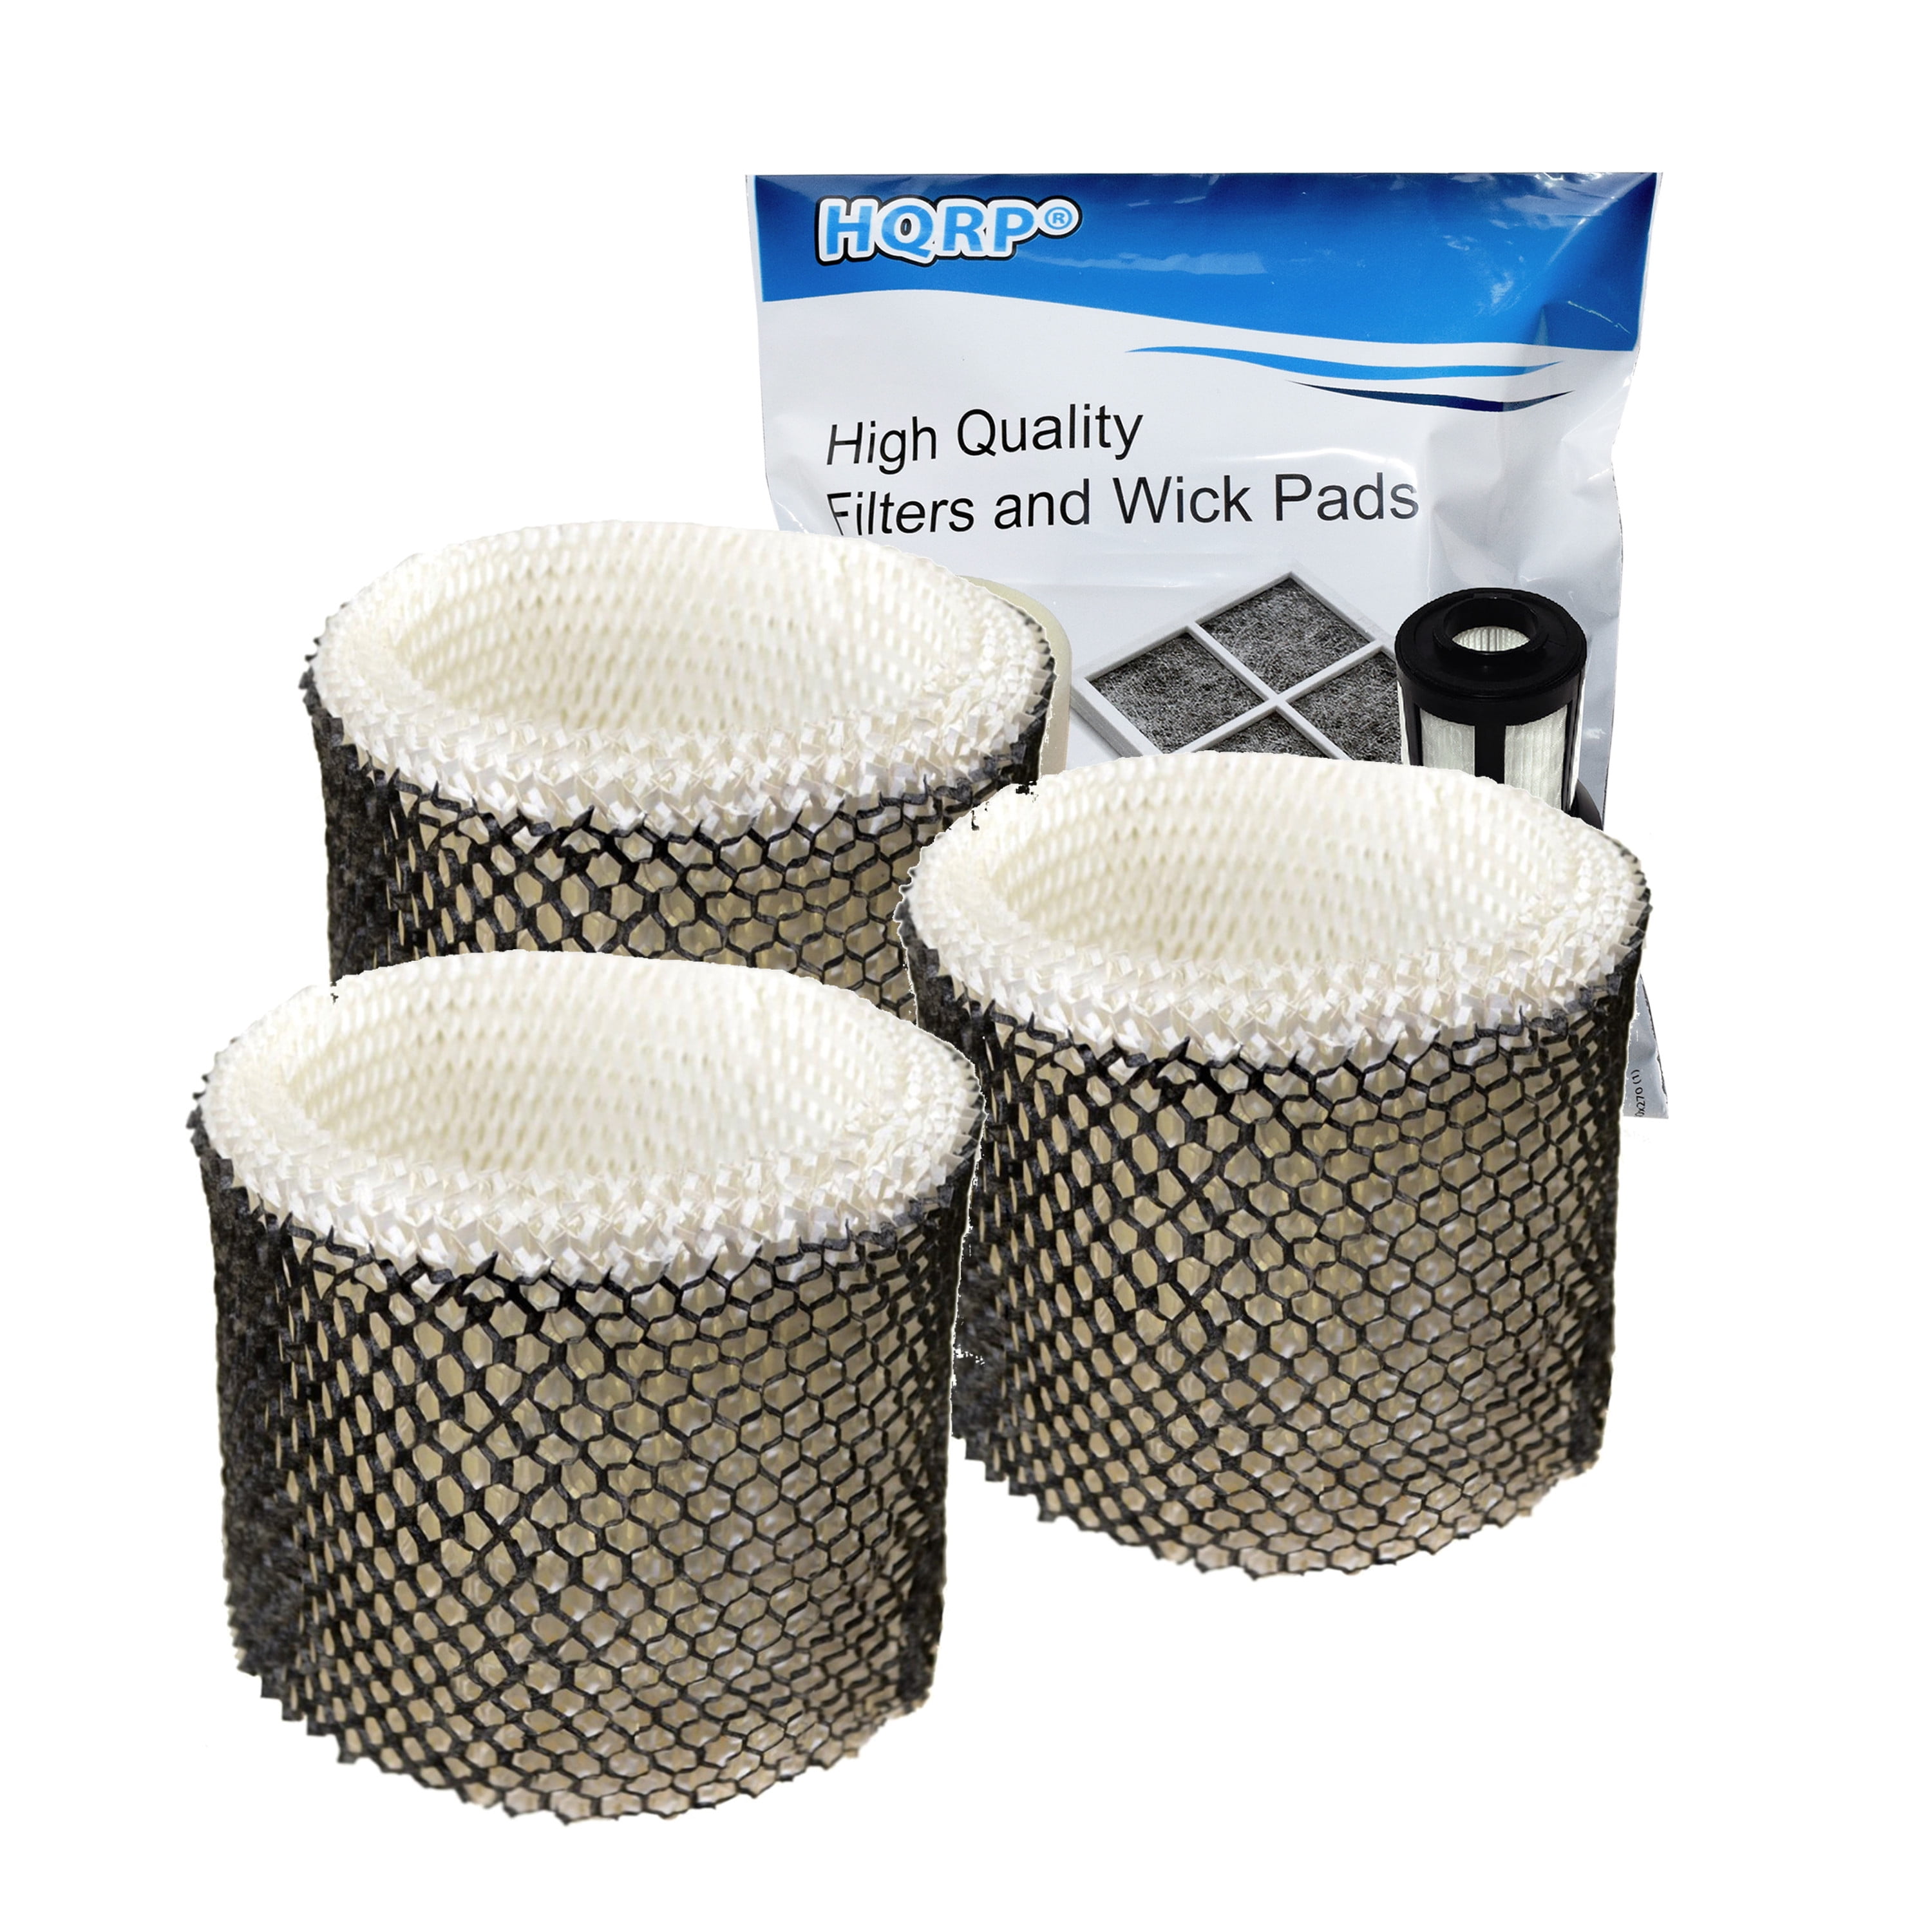 9 Pack Replacement Humidifier Wick Filter Fits Honeywell HAC-801, HCM-88C, HCM-3060, Duracraft DH Models, and Kenmore 1478, 14108 Humidifiers